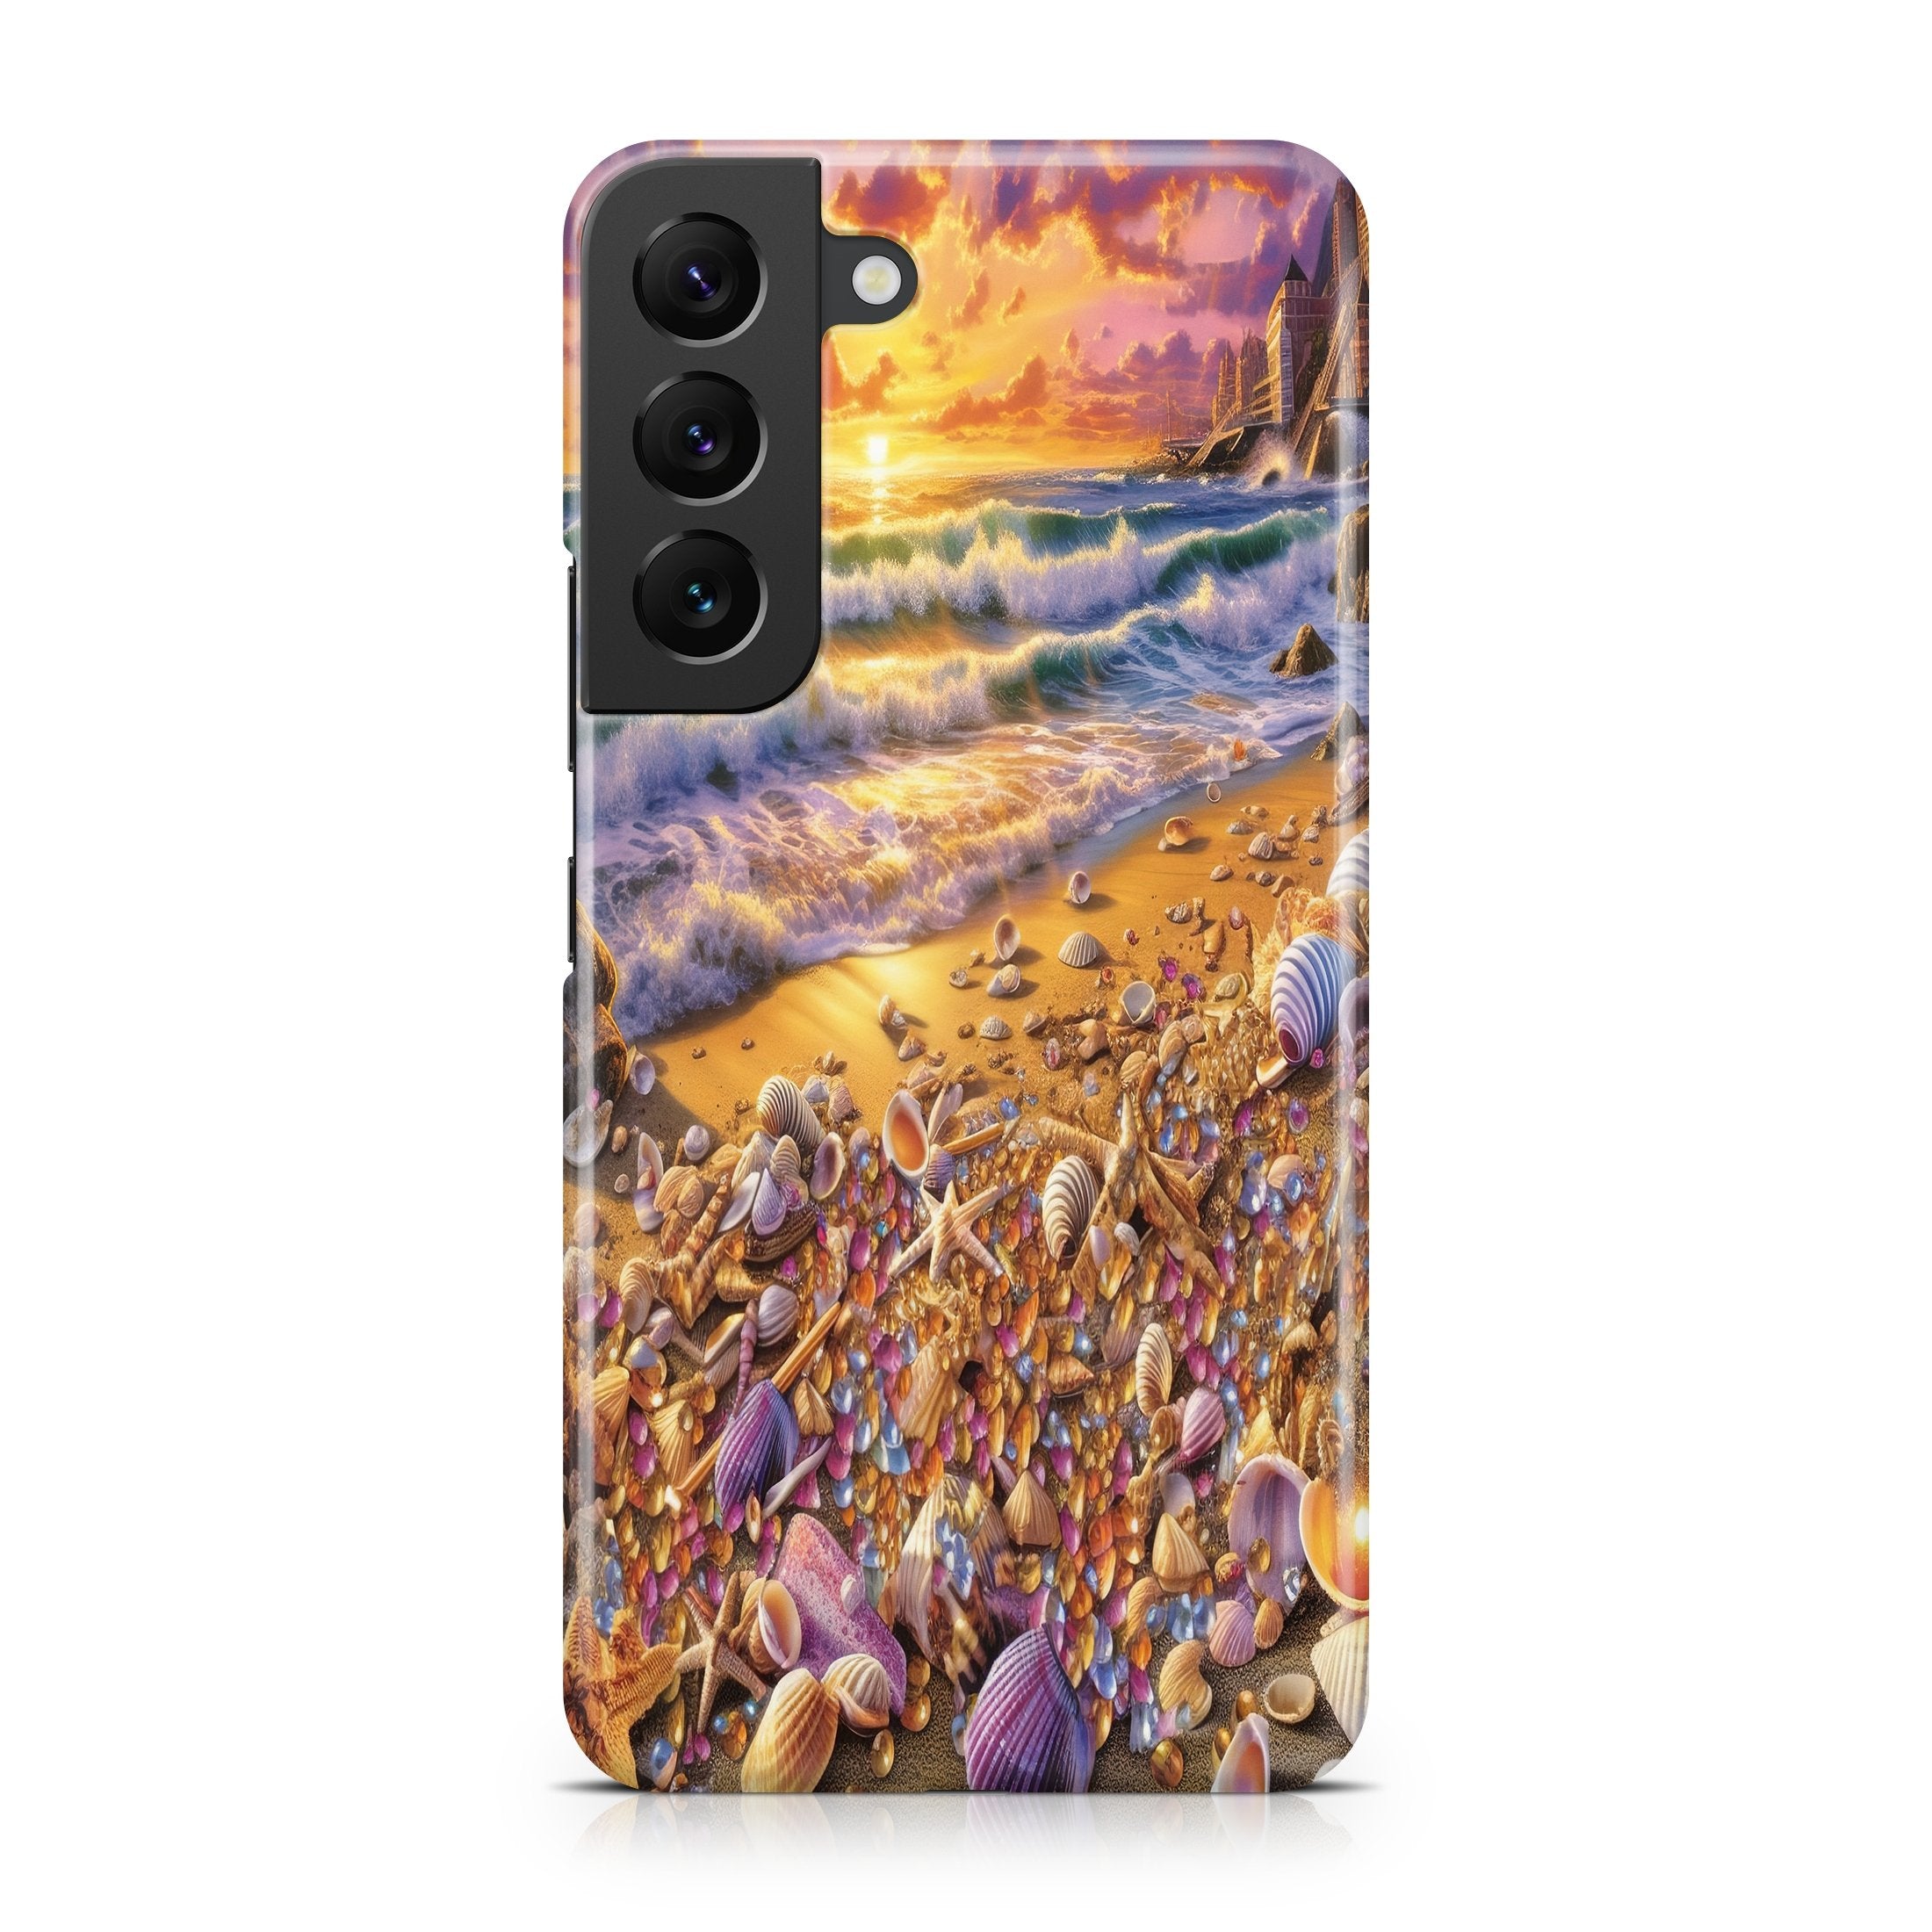 Beachside Treasure - Samsung phone case designs by CaseSwagger